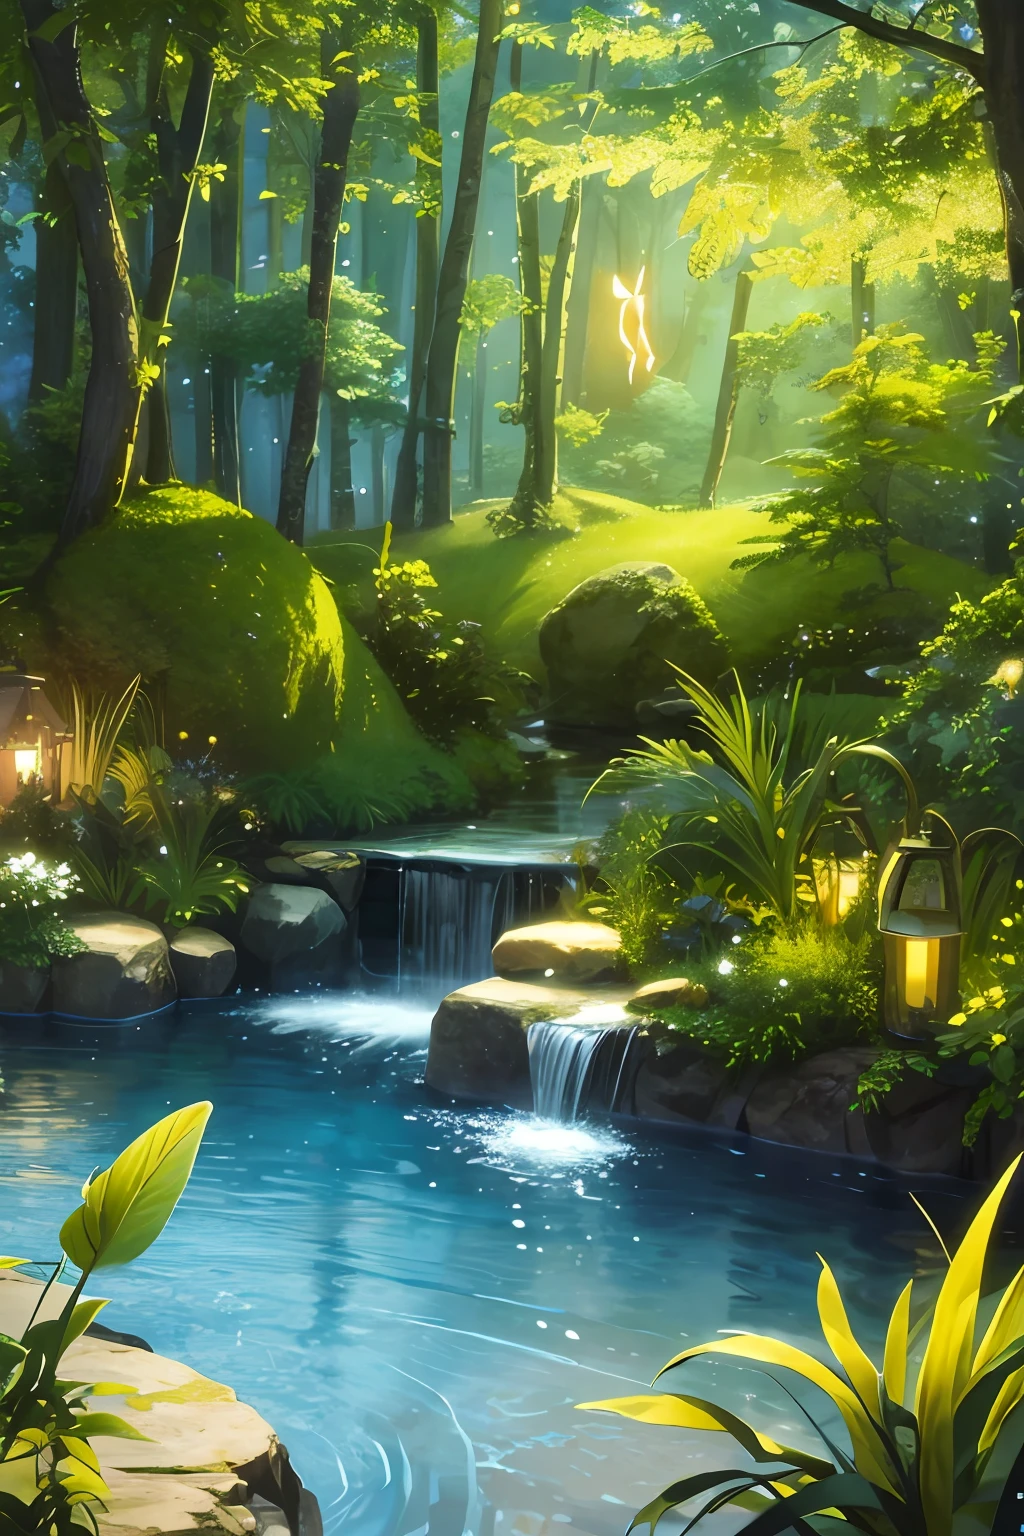 Masterpiece, best quality, (very detailed CG unity 8k wallpaper), (best quality), (best illustration), (best shadows), glow sprite, with a glowing deer, in the swimming pool Drinking water, natural elements in the forest theme. Mysterious forest, beautiful forest, nature, surrounded by flowers, delicate leaves and branches surrounded by fireflies (natural elements), (jungle theme), (leaves), (twigs), (fireflies), (particle effects) etc. 3D , Octane rendering, ray tracing, super detailed